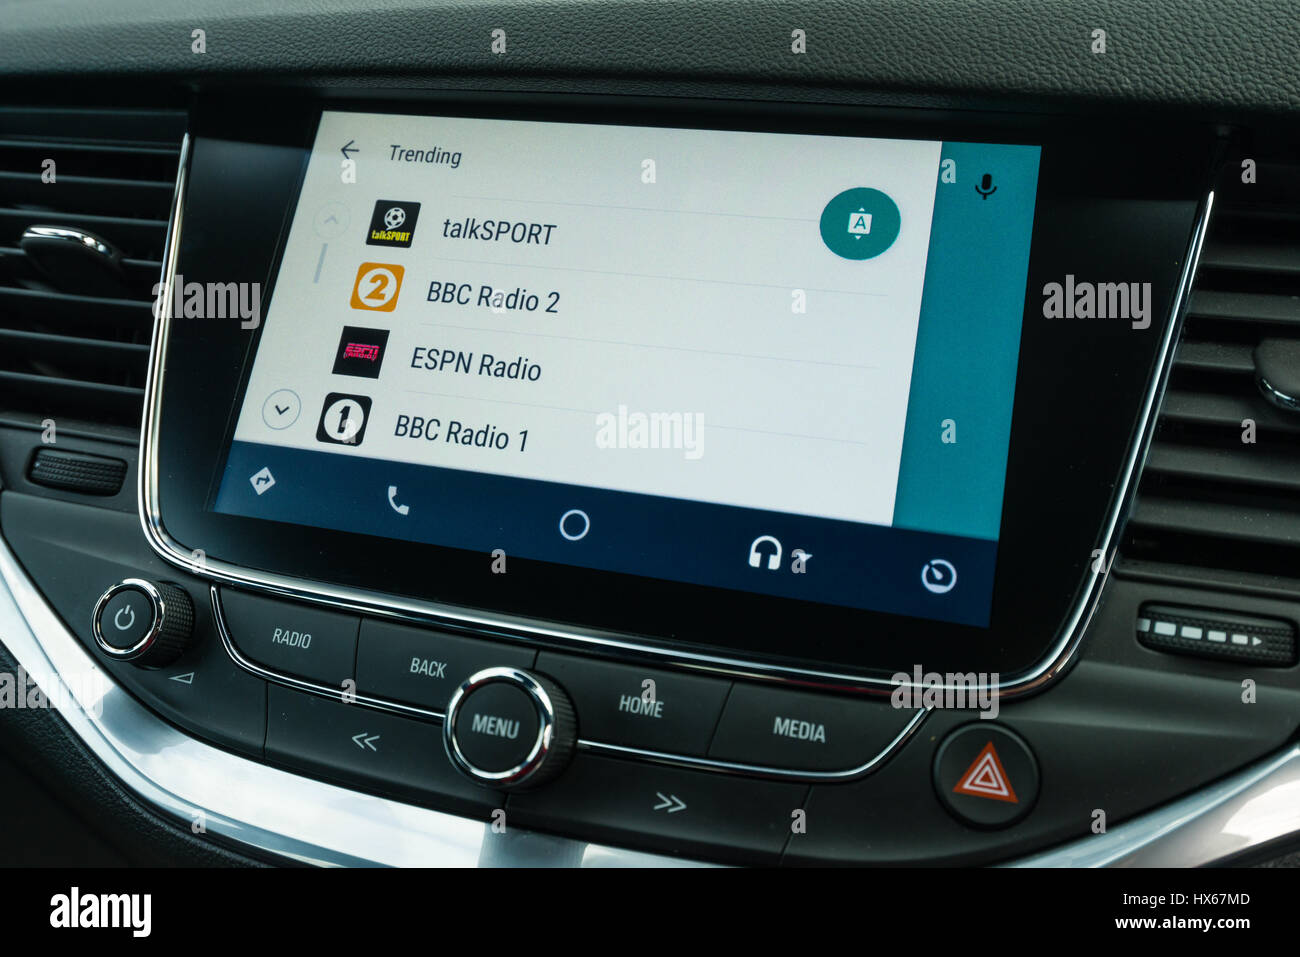 Android Auto Car Vehicle Navigation Interface Showing TuneIn App List Stock  Photo - Alamy